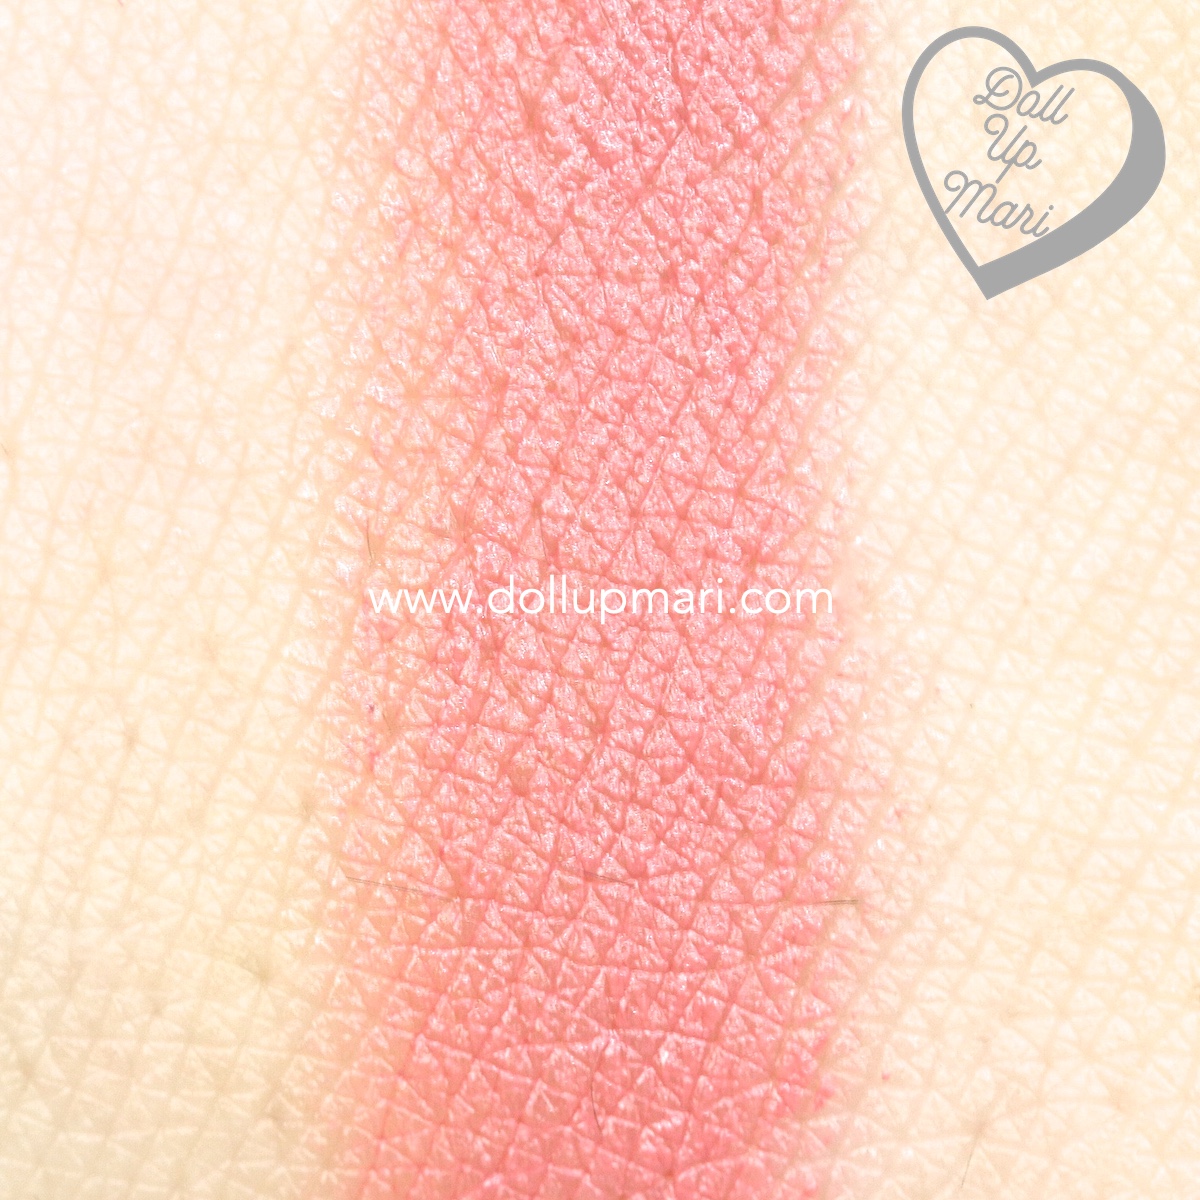 swatch of Rouged Perfection shade of AVON Perfectly Matte Lipstick